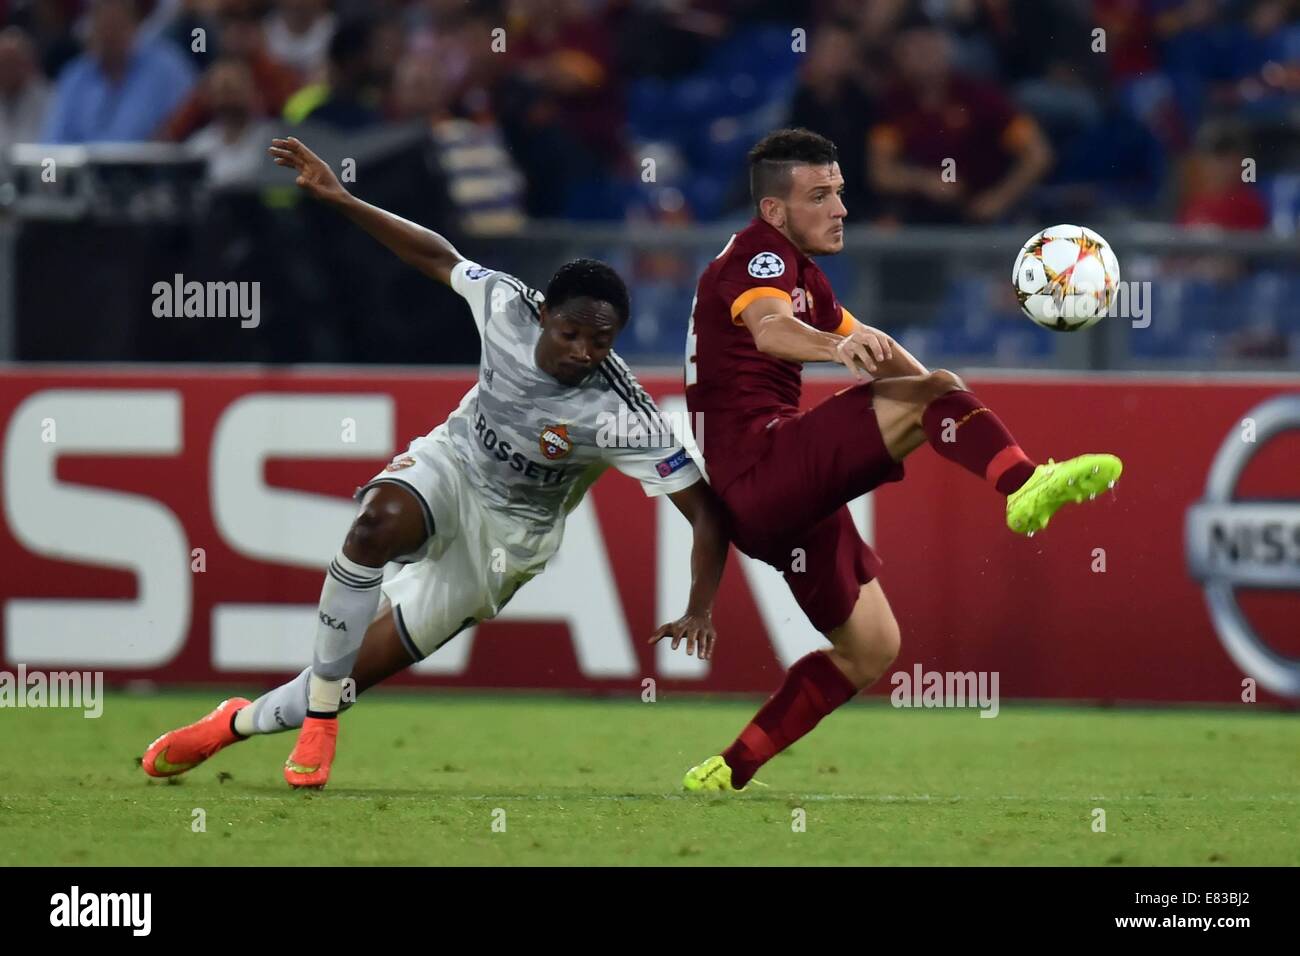 Rome, Italy. 17th Sep, 2014. UEFA Champions league football, group stages. AS Roma versus CSKA (Russia). Ahmed Musa CSKA and Alessandro Florenzi As Roma challenge for the ball © Action Plus Sports/Alamy Live News Stock Photo